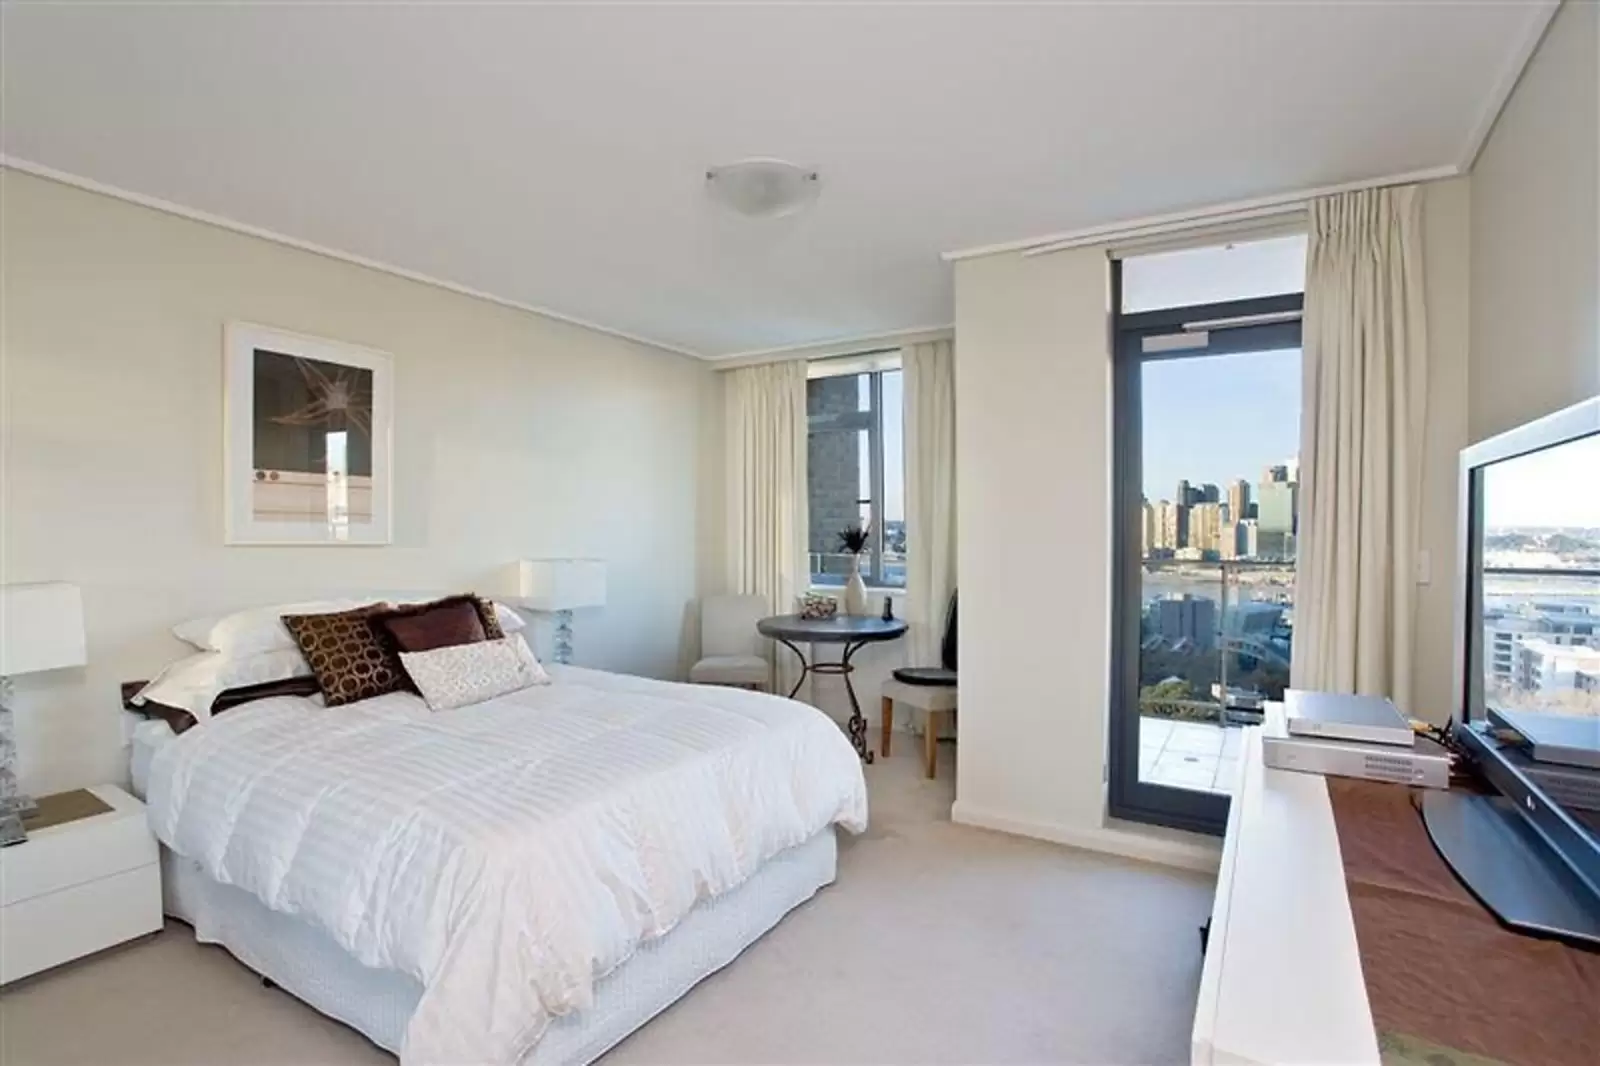 Photo #6: 1402/21 Cadigal Avenue, Pyrmont - Sold by Sydney Sotheby's International Realty